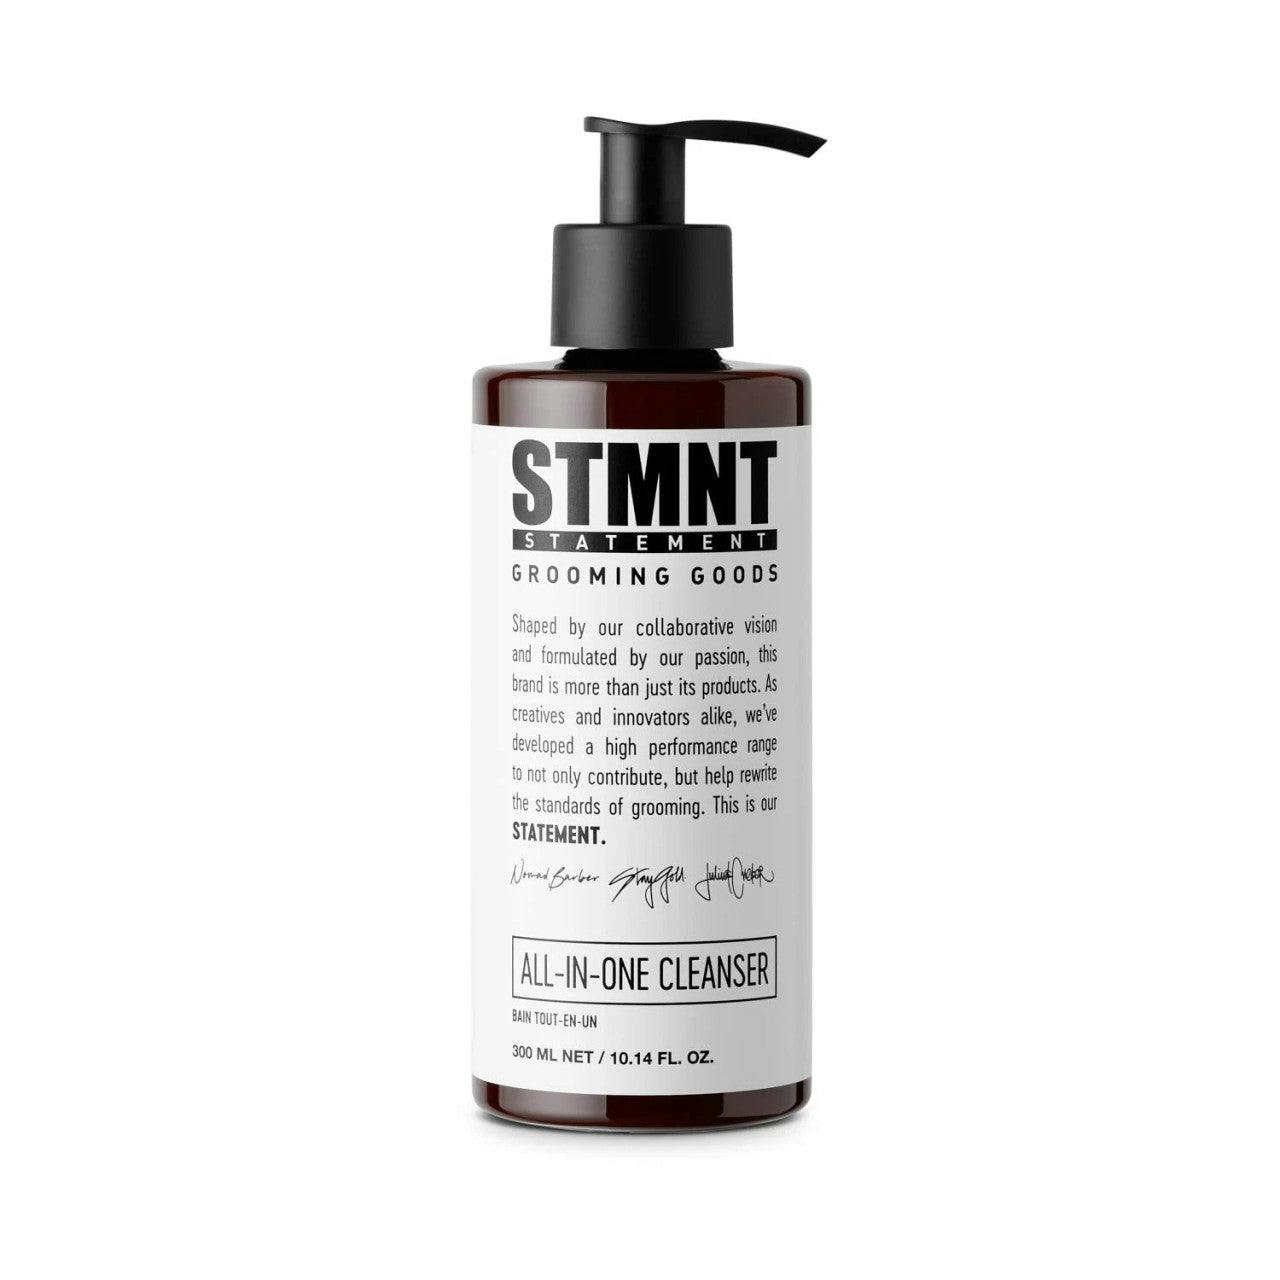 STMNT Grooming Goods All in one cleanser 300ml